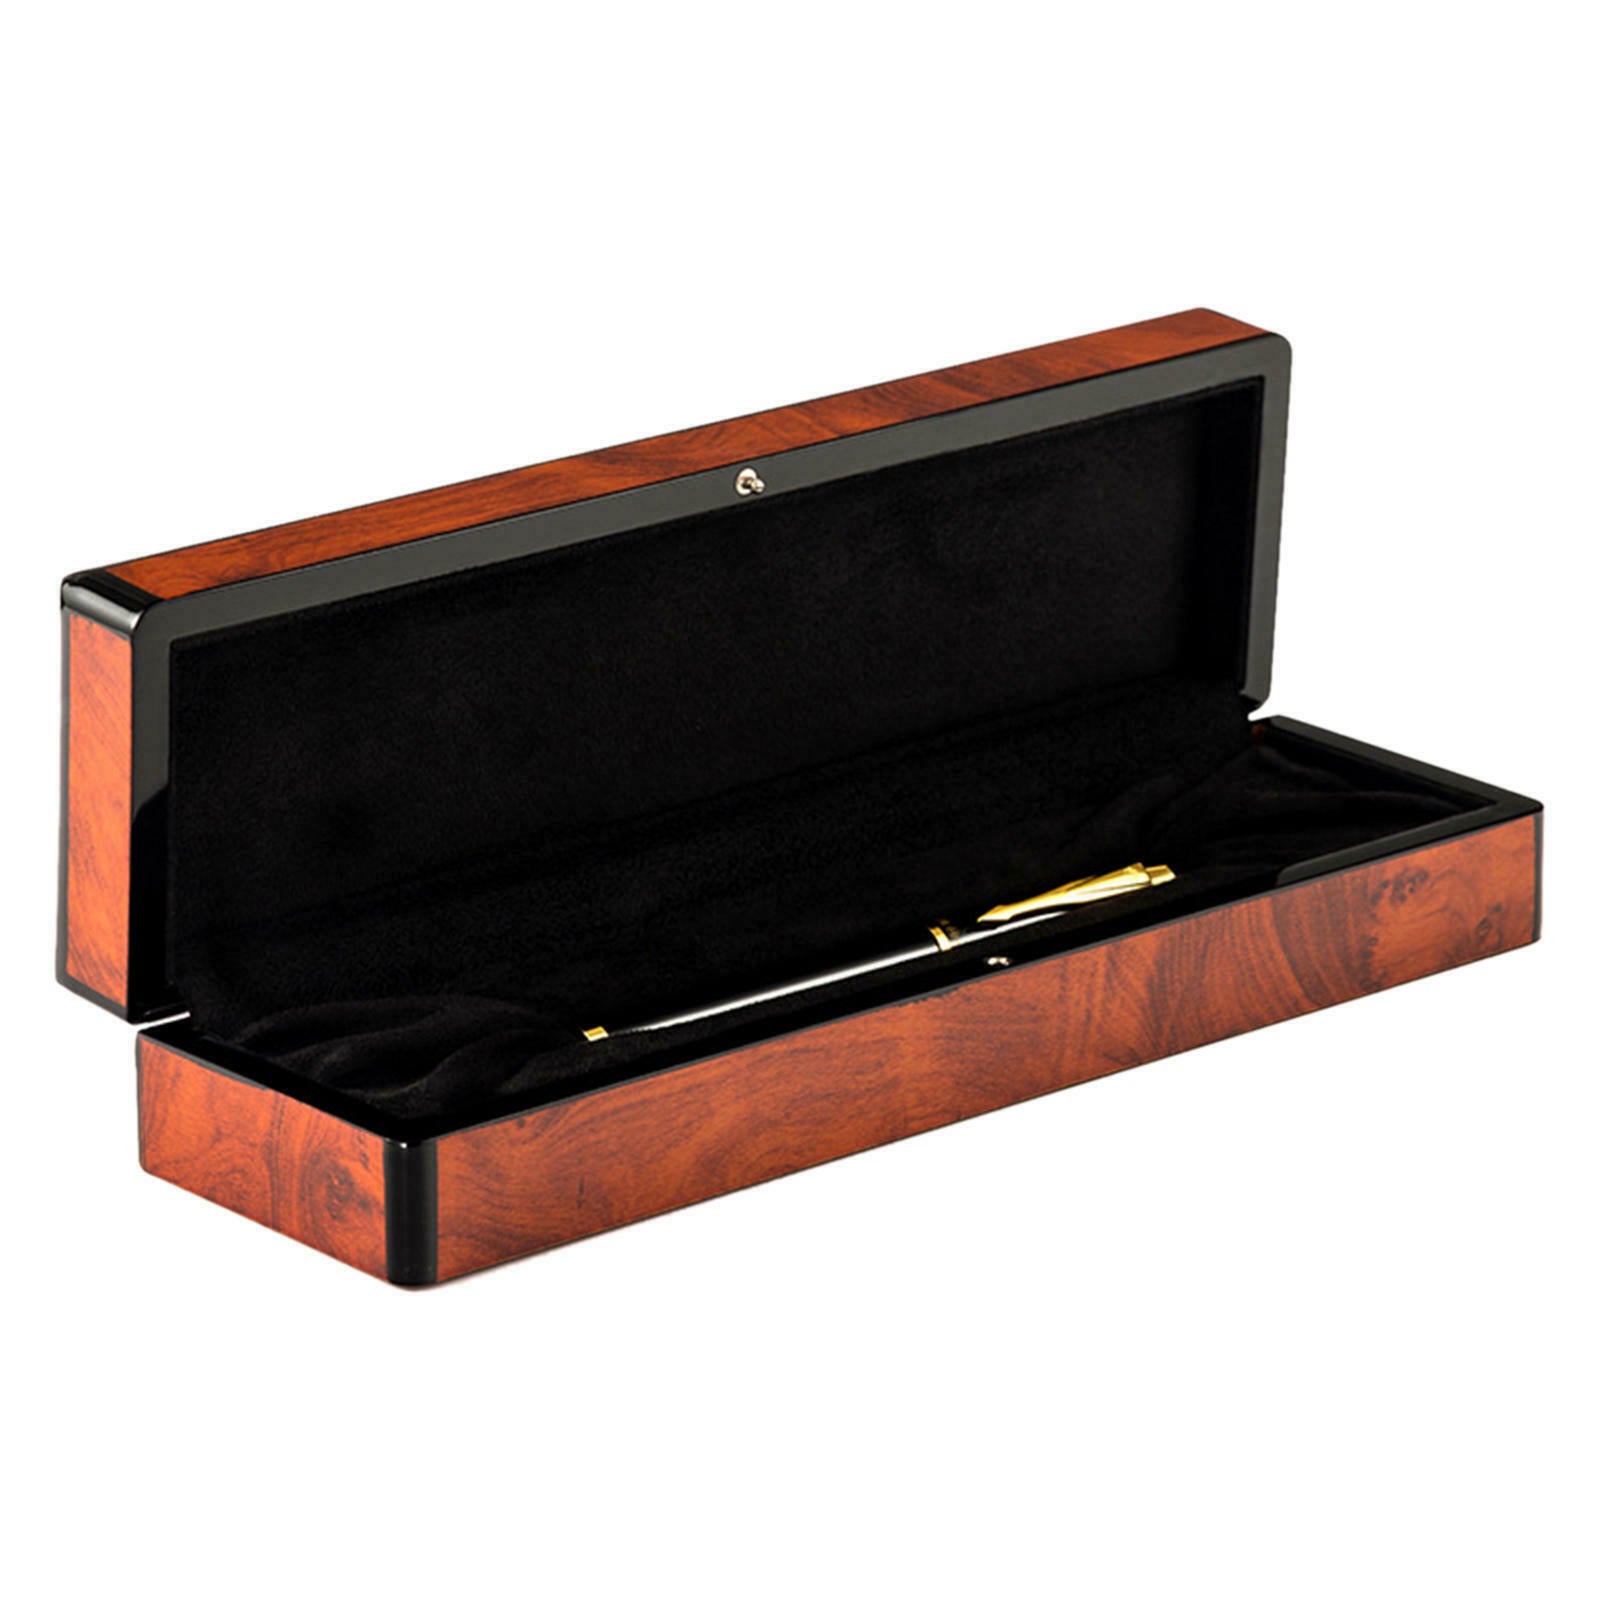 Retro Solid Wood Cigar Pen Case Holder Stationery Storage Box Container